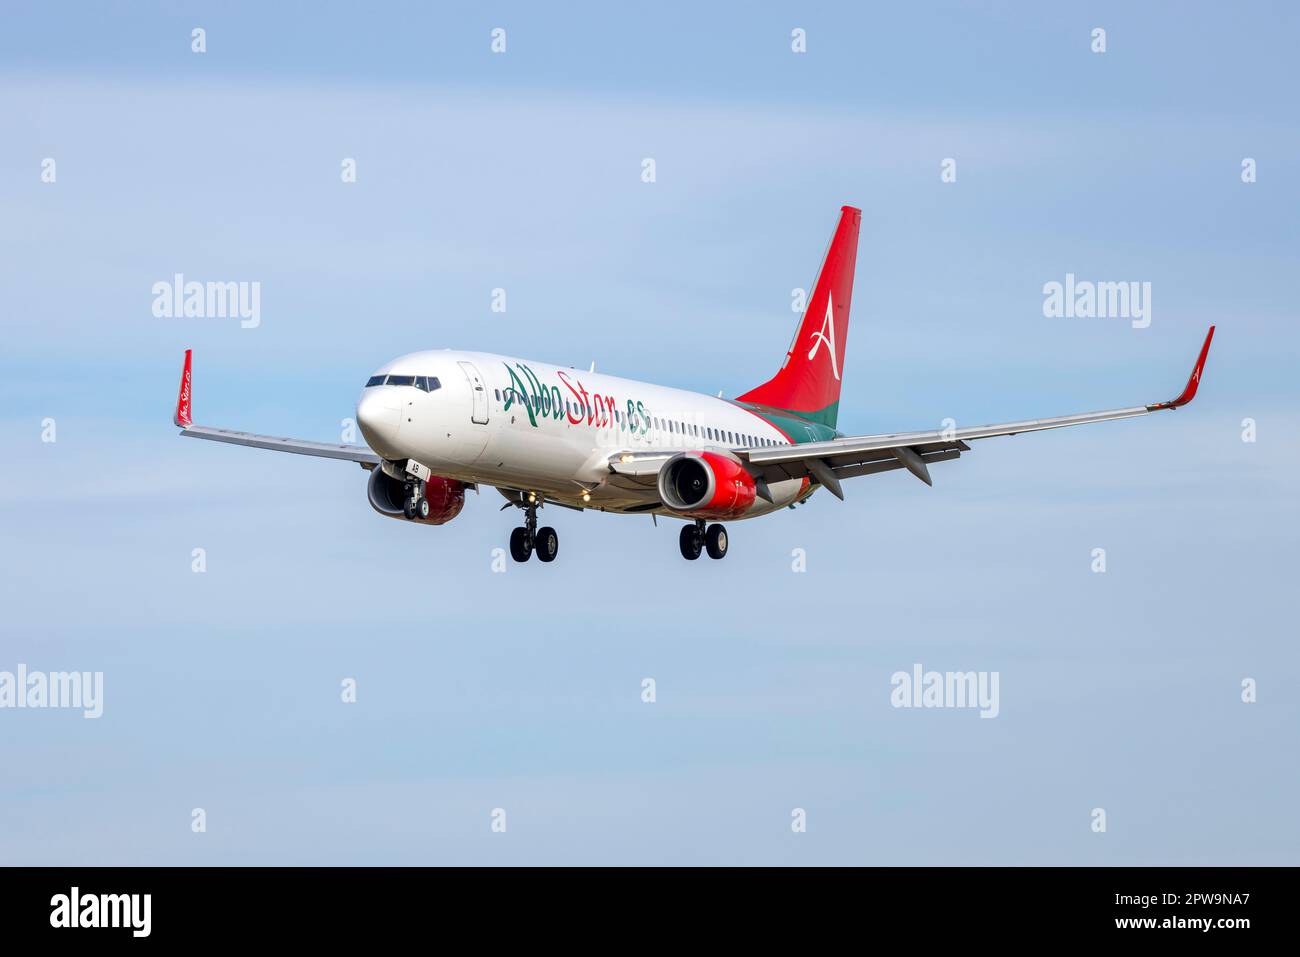 Alba Star Boeing 737-81Q (REG: EC-NAB) coming in to land on another Air  Malta flight Stock Photo - Alamy